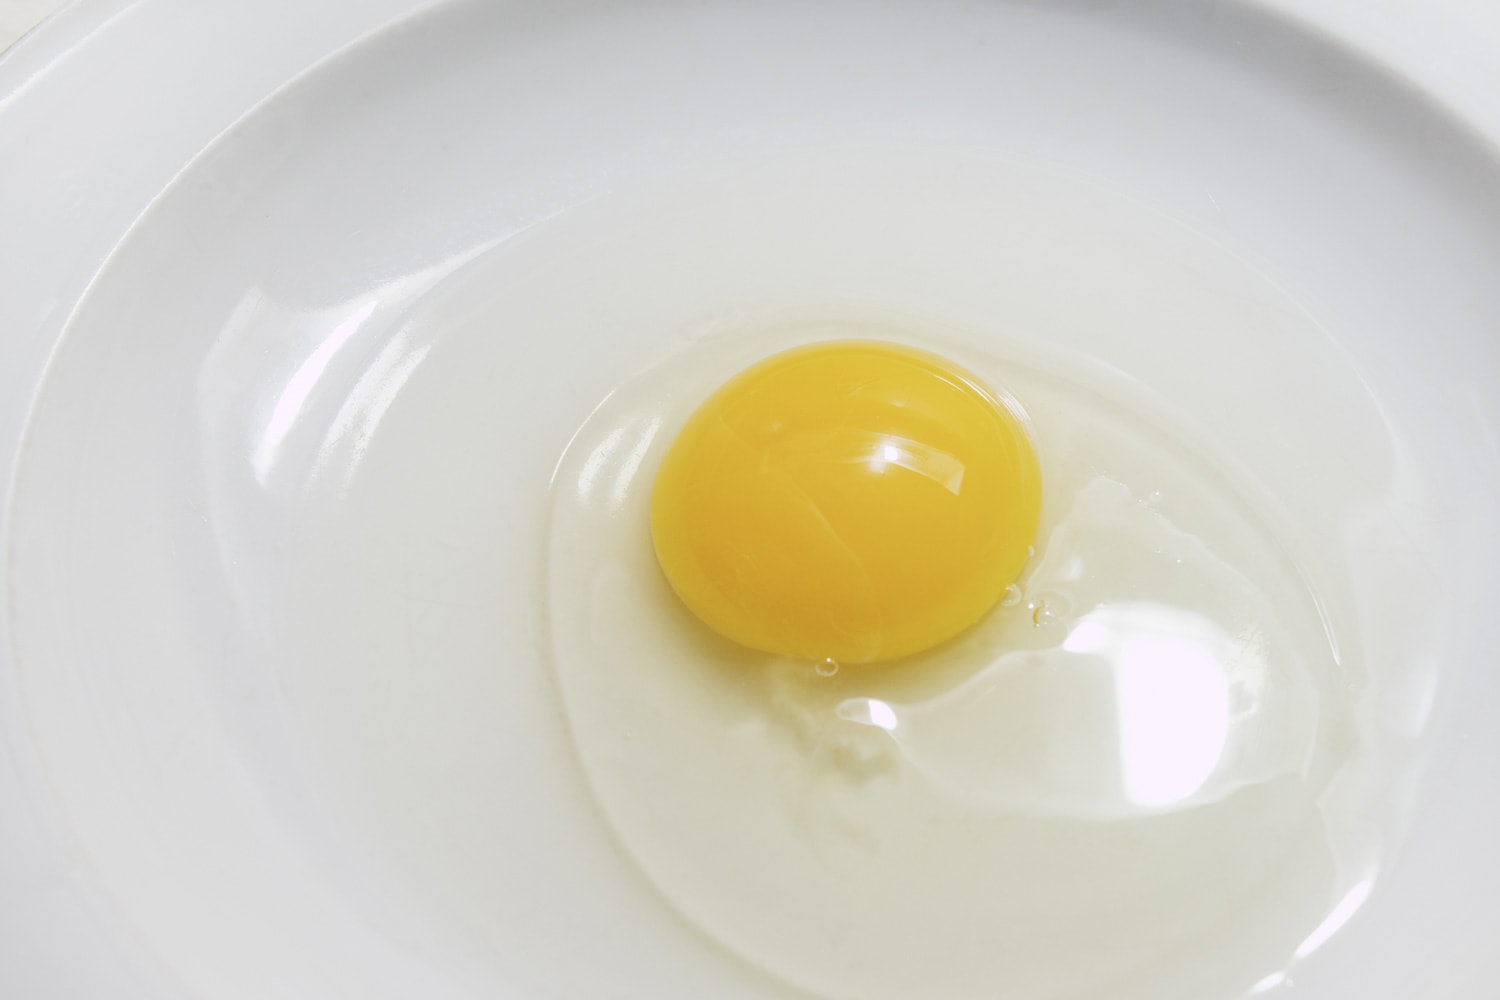 Stale eggs with rupture broken egg yolk and watery egg white in a white plate on white background. isolated broken stale egg.photo